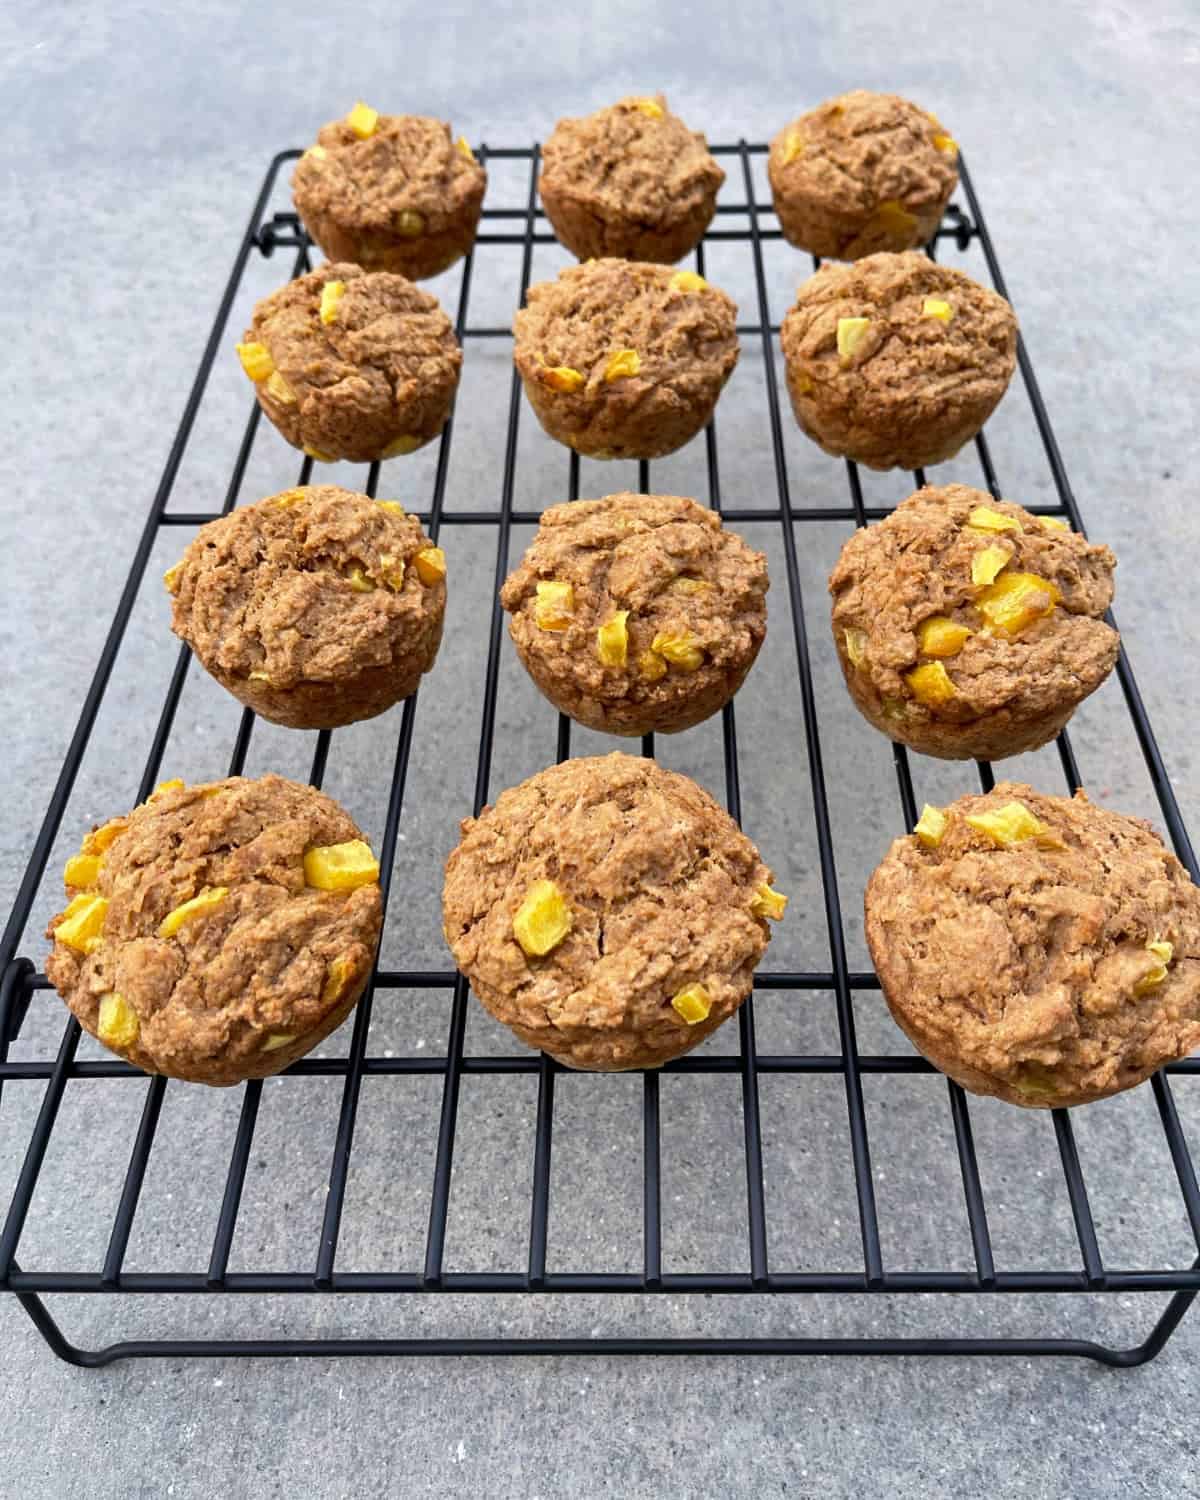 Fiber One mango muffins cooling on wire rack.